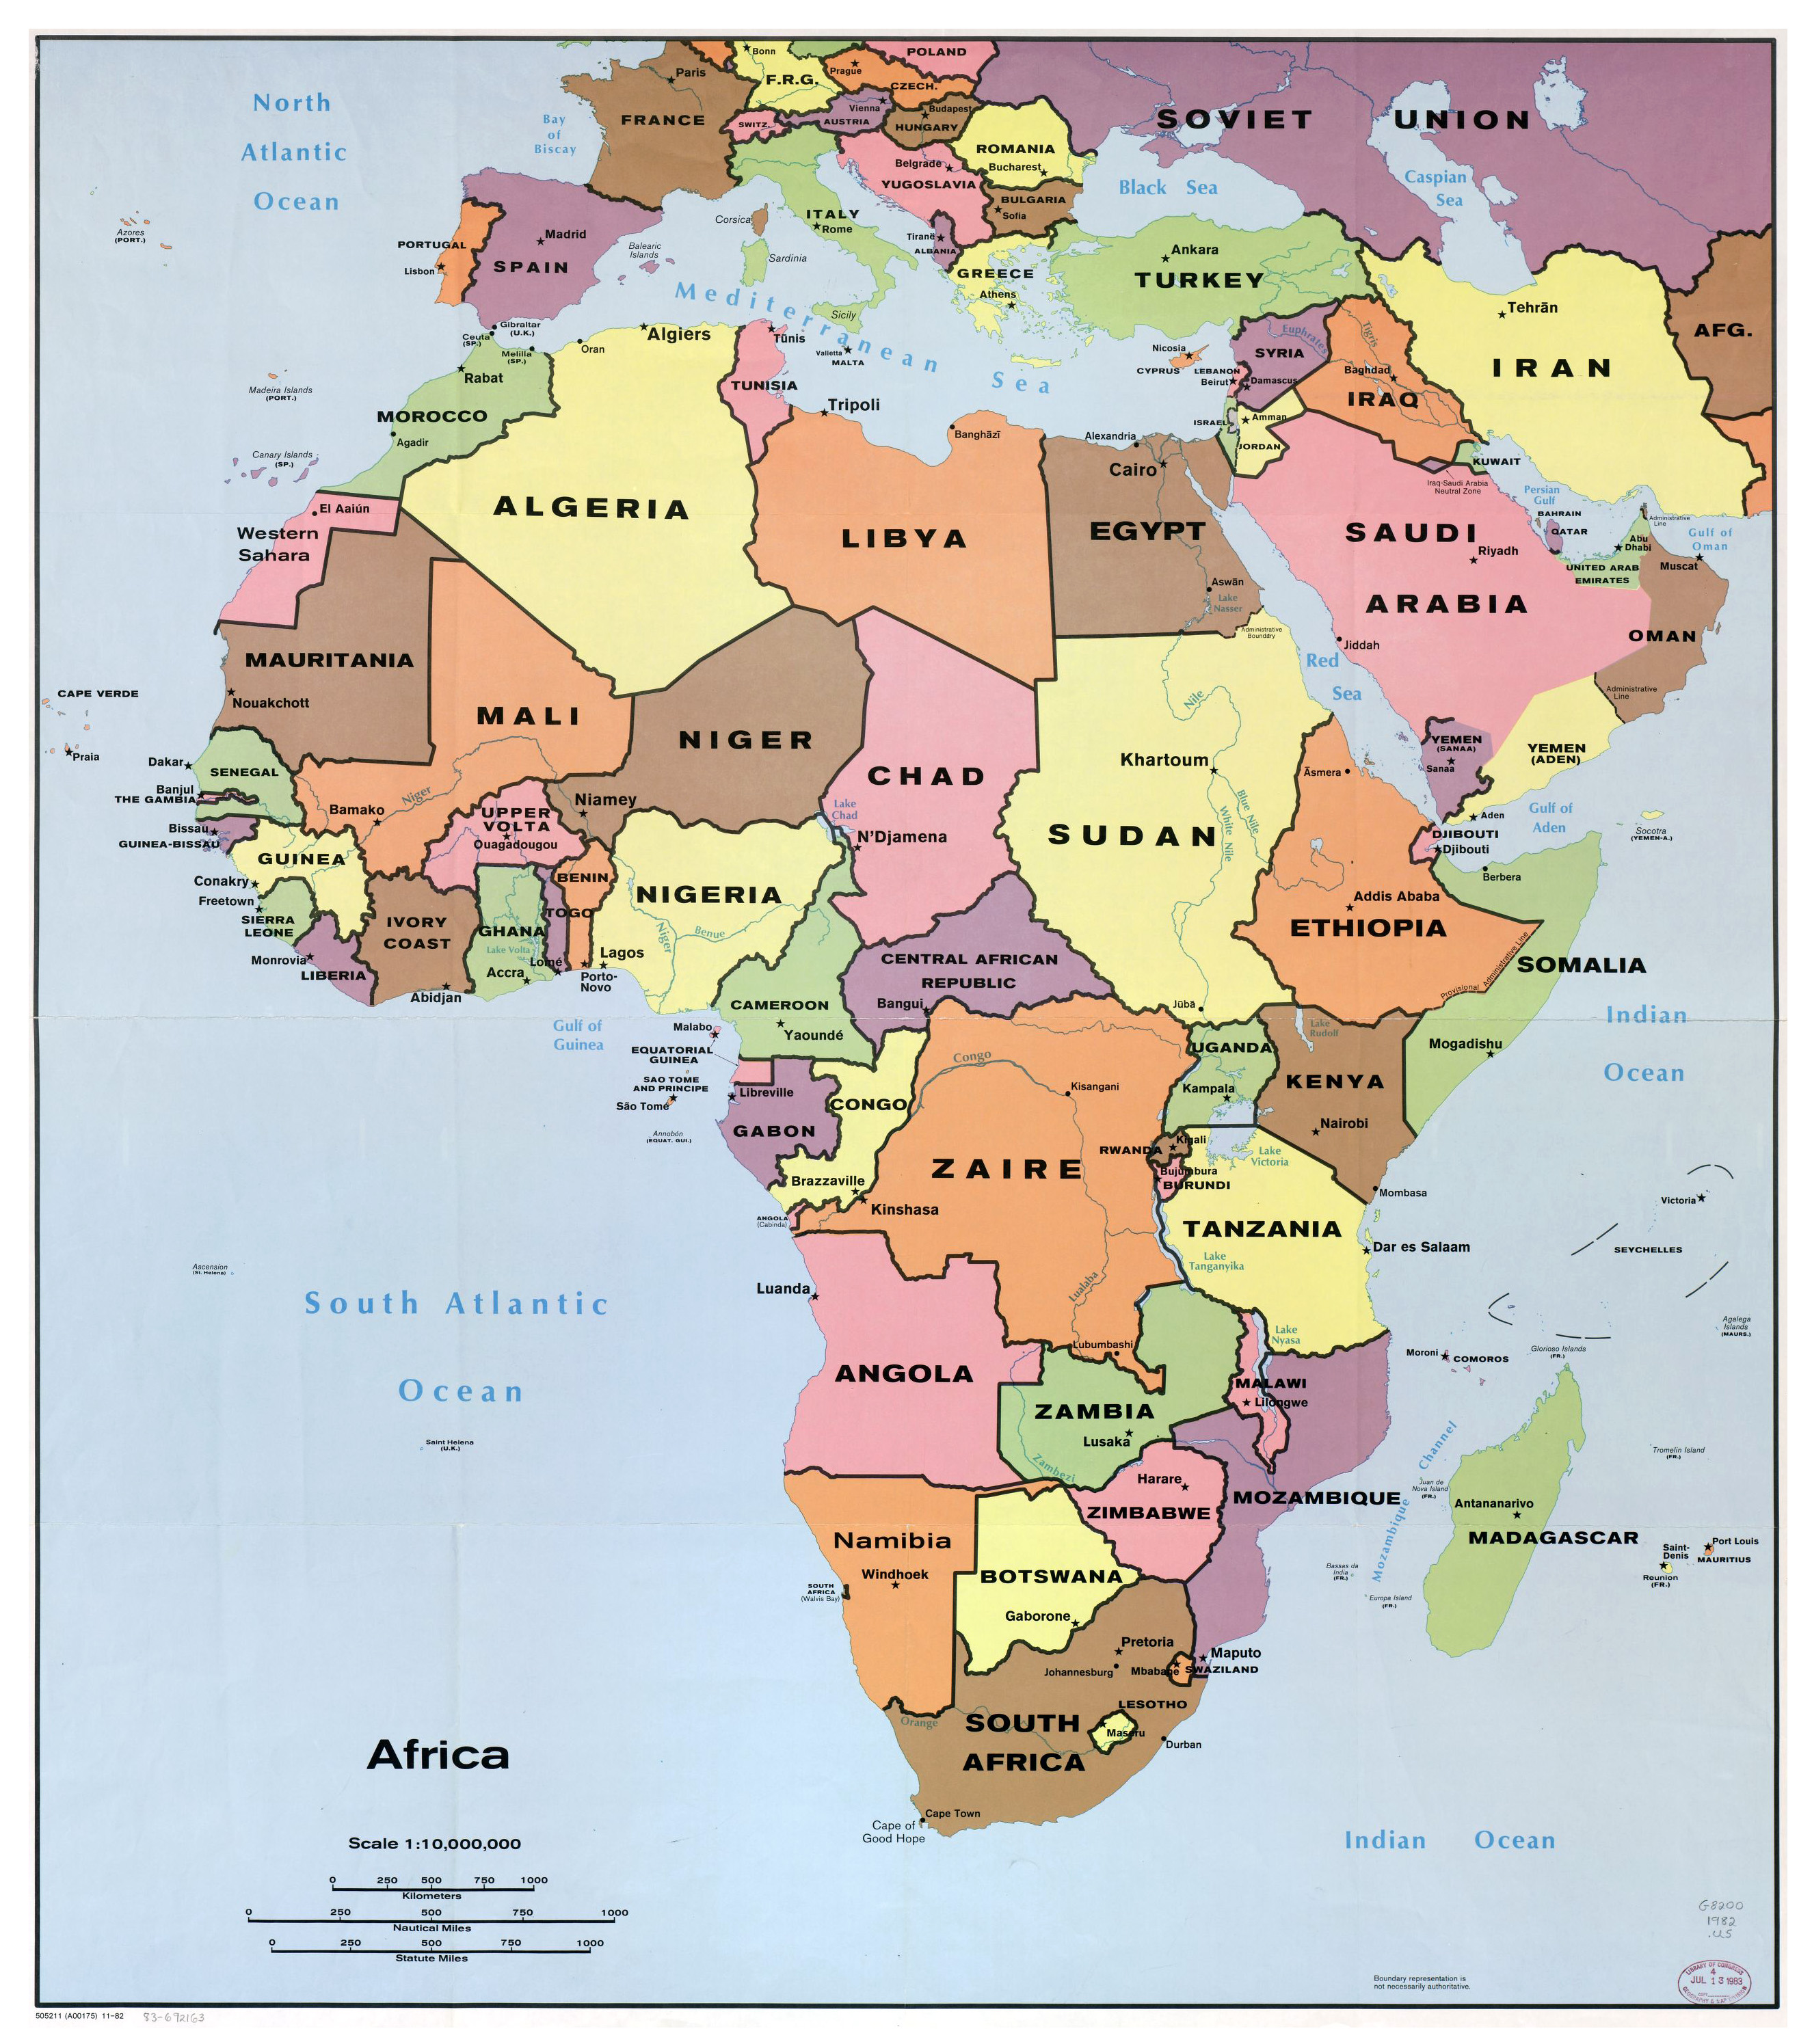 large-detailed-political-divisions-map-of-africa-with-capitals-photos